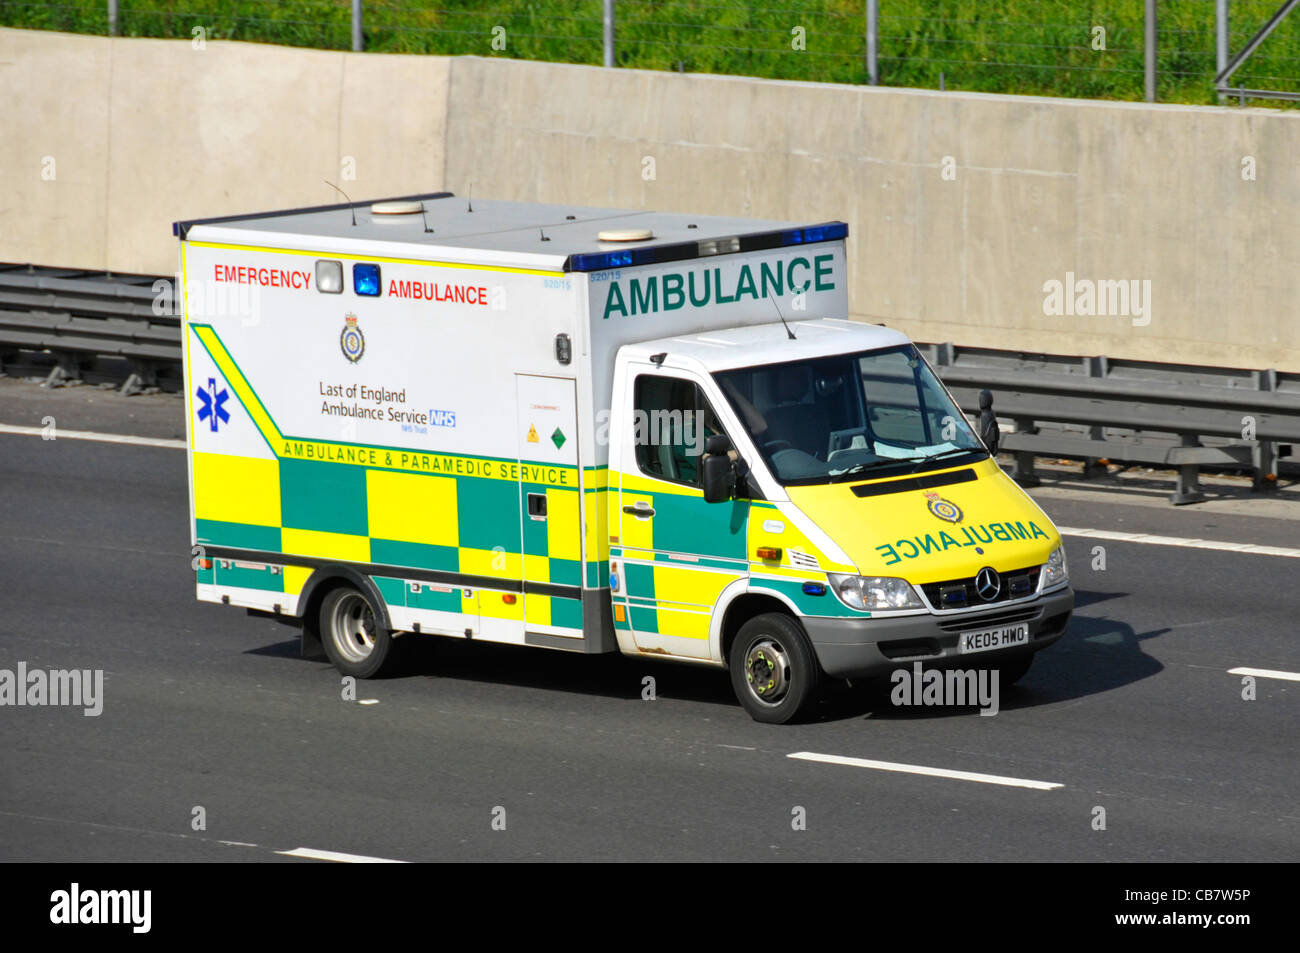 Emergency ambulance apparent spelling mistake on side stating Last instead of (assumed) East or possibly vandalism (has not been digitally altered) Stock Photo